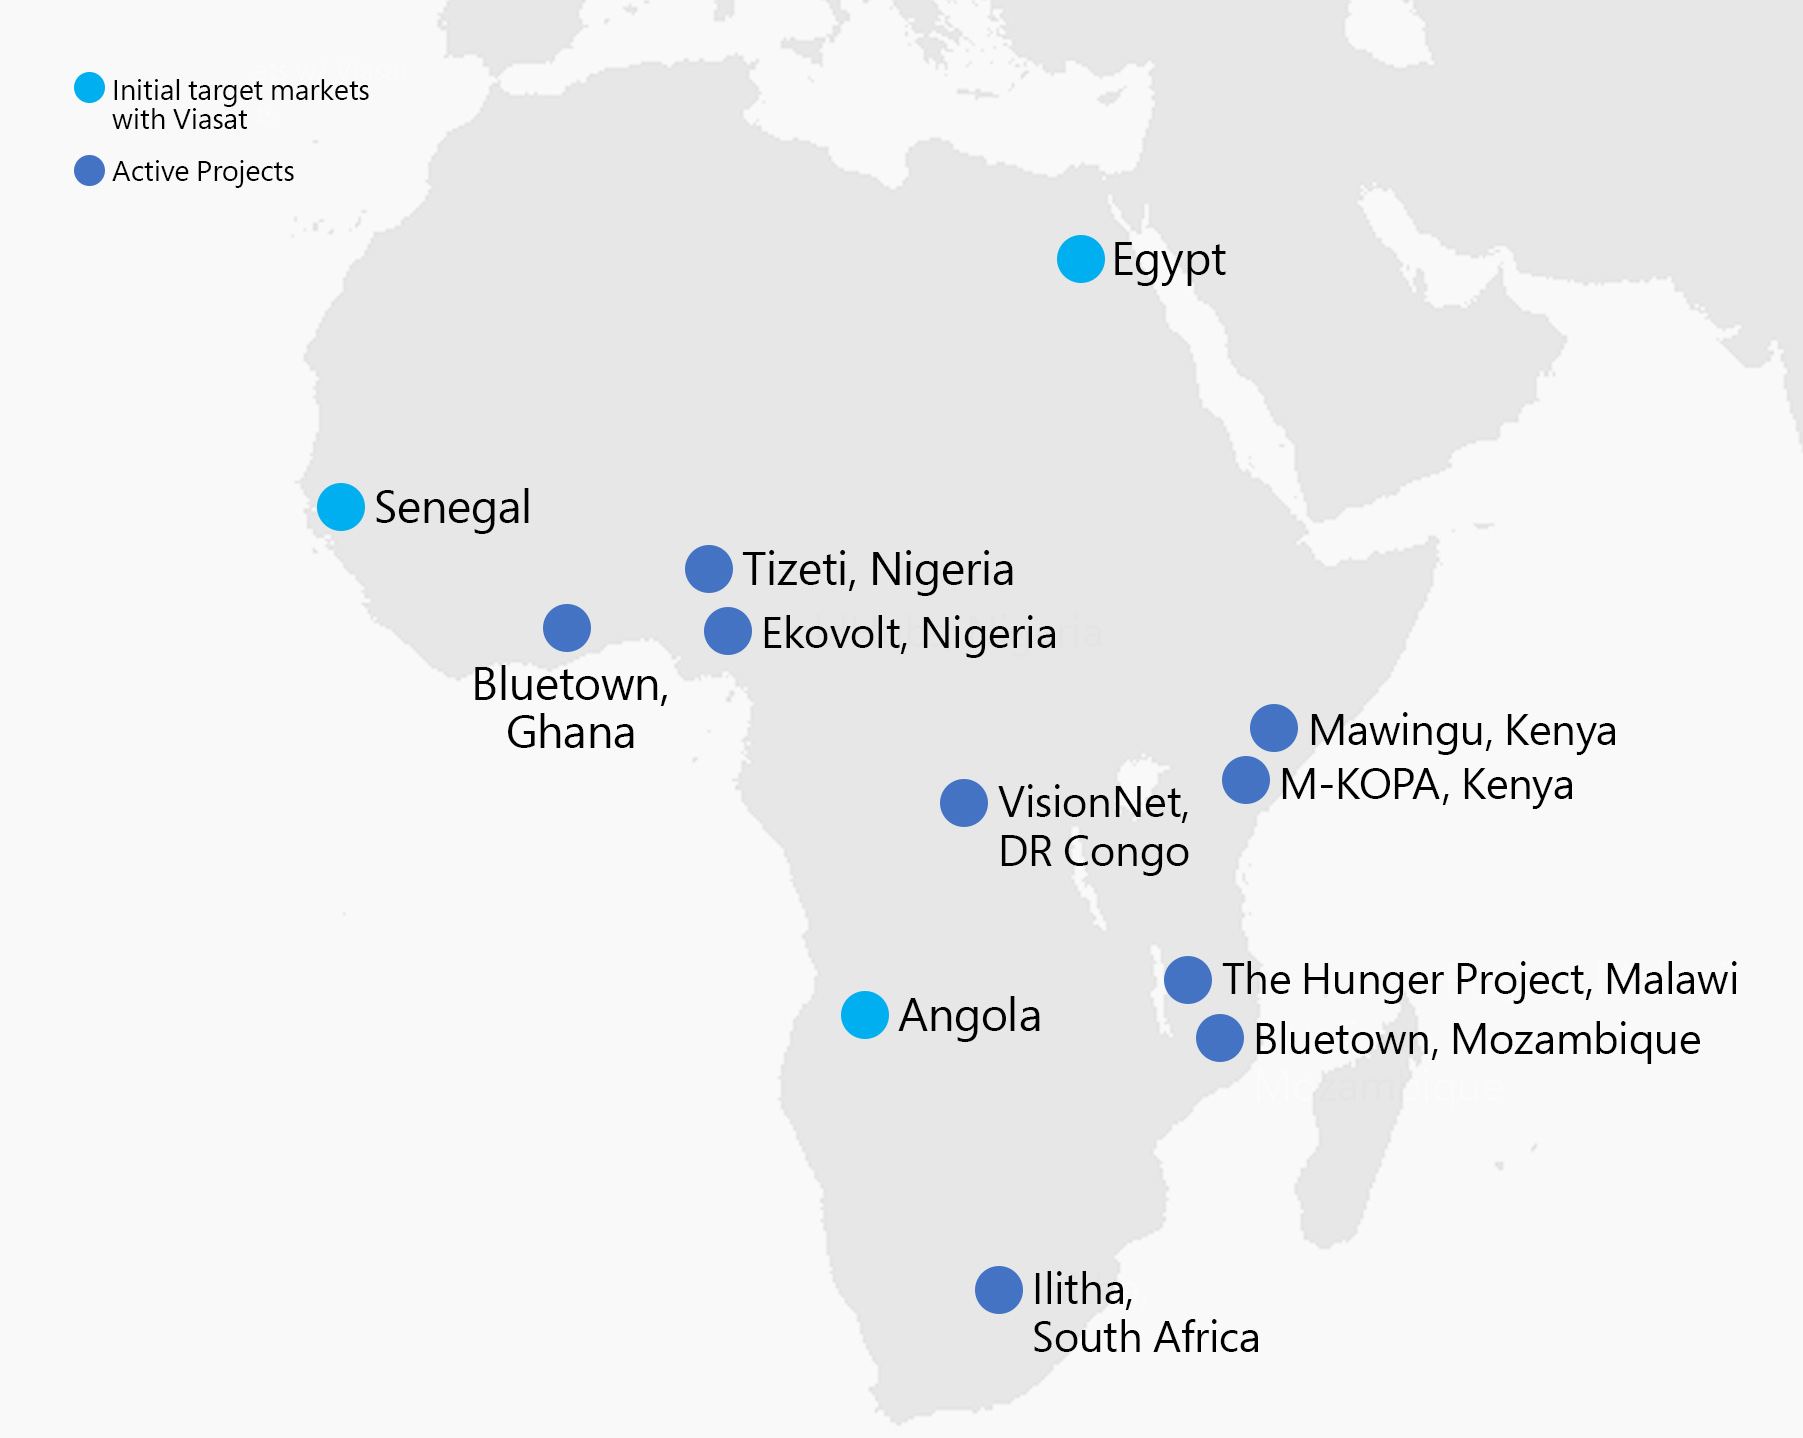 Map of Africa showing partners and active projects